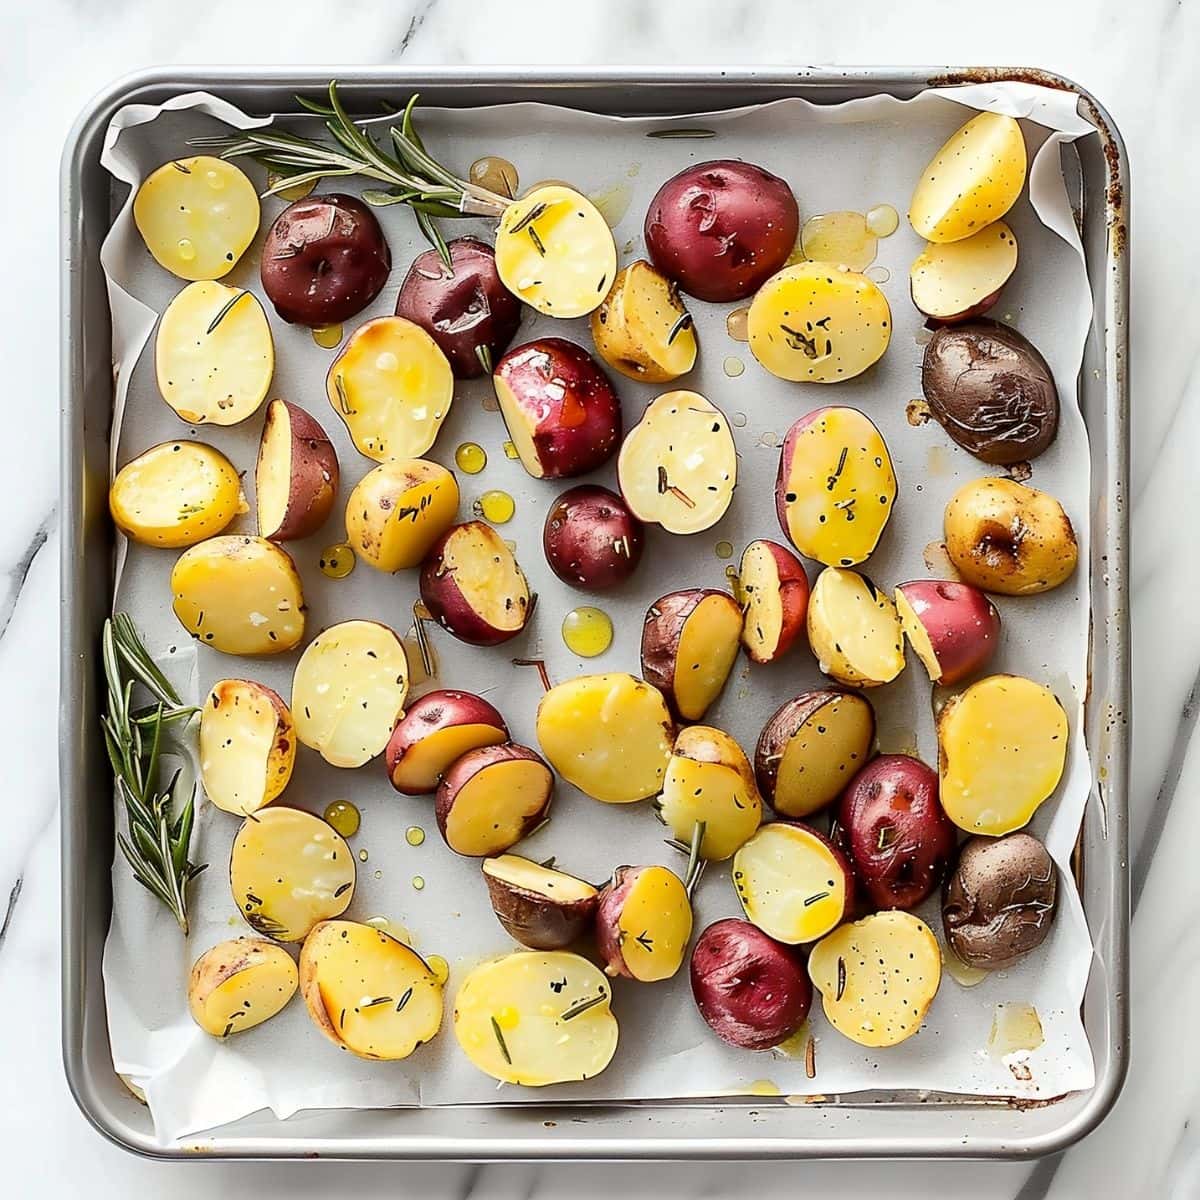 Raw, Cut  Potatoes on a Parchment-Lined Baking Tray with Rosemary Springs